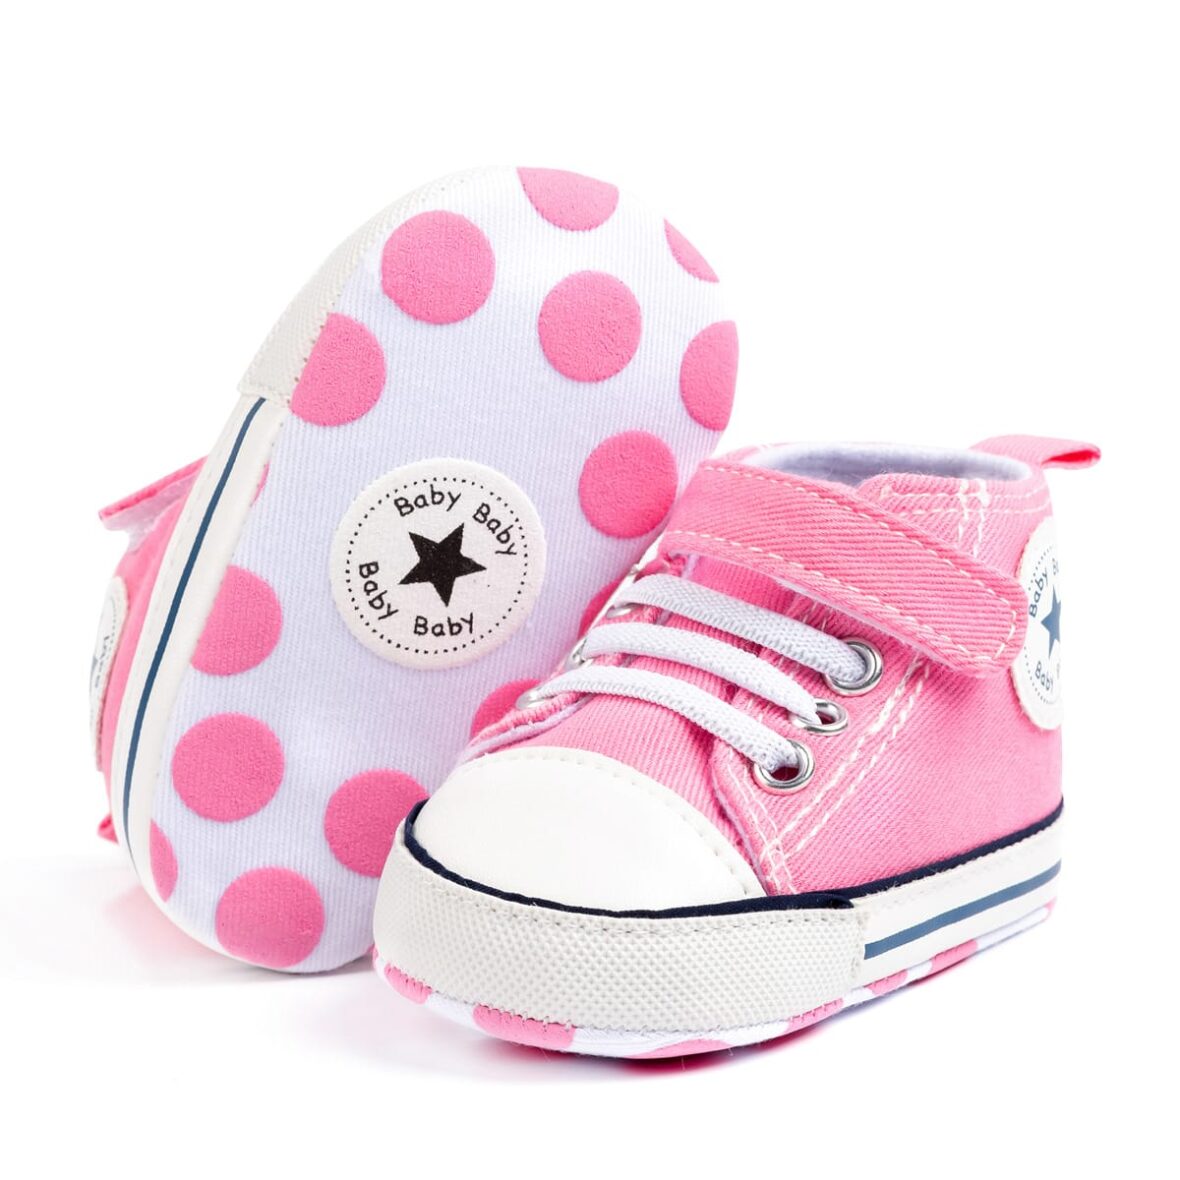 Baby Strap Ankle Soft Sole Sneakers Available On Awoof Special Sales